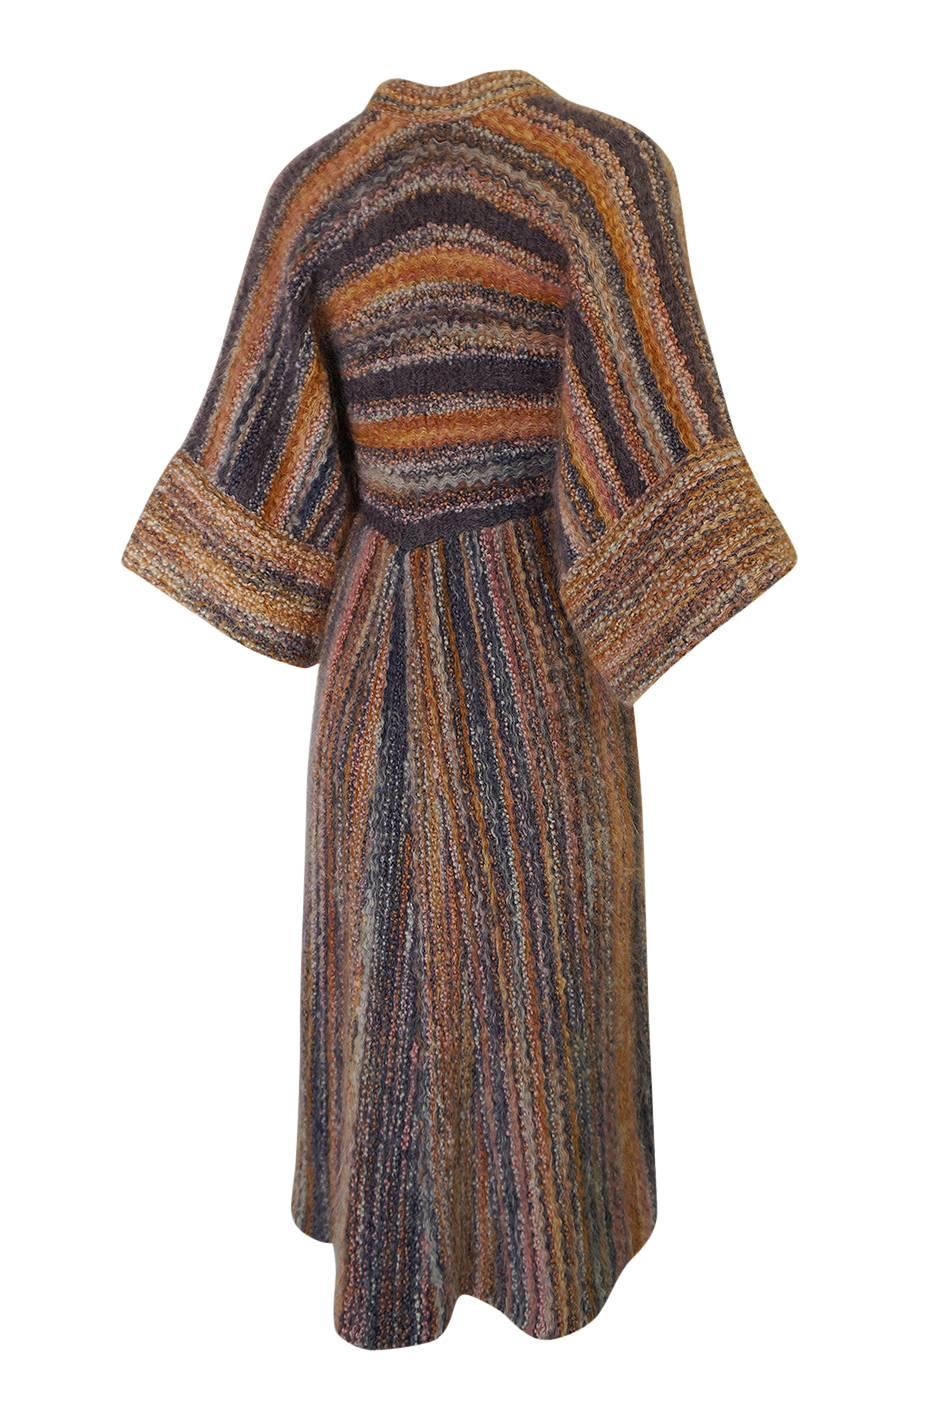 Kay Cosserat was a British knitwear designer. The majority of her work is held in the permanent collection of the Victoria & Albert Museum in London, leaving few of her pieces out in circulation. She launched her own label in 1974 and was well known